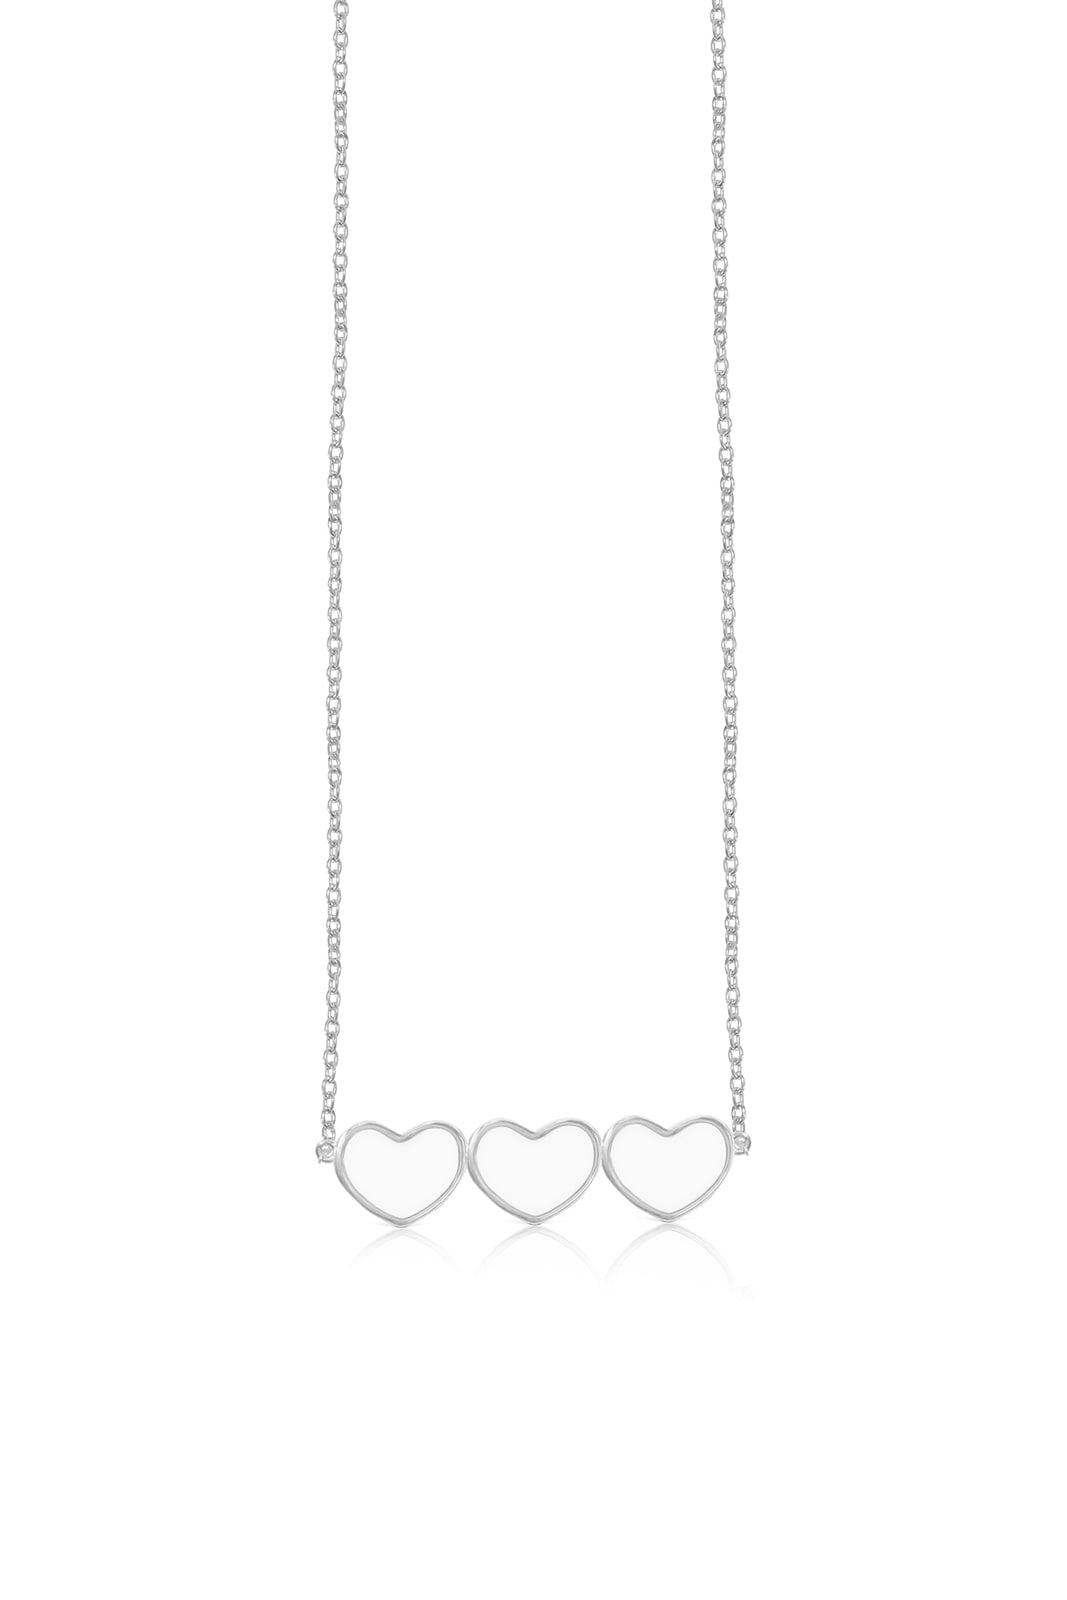 Heart strings necklace - White Gold